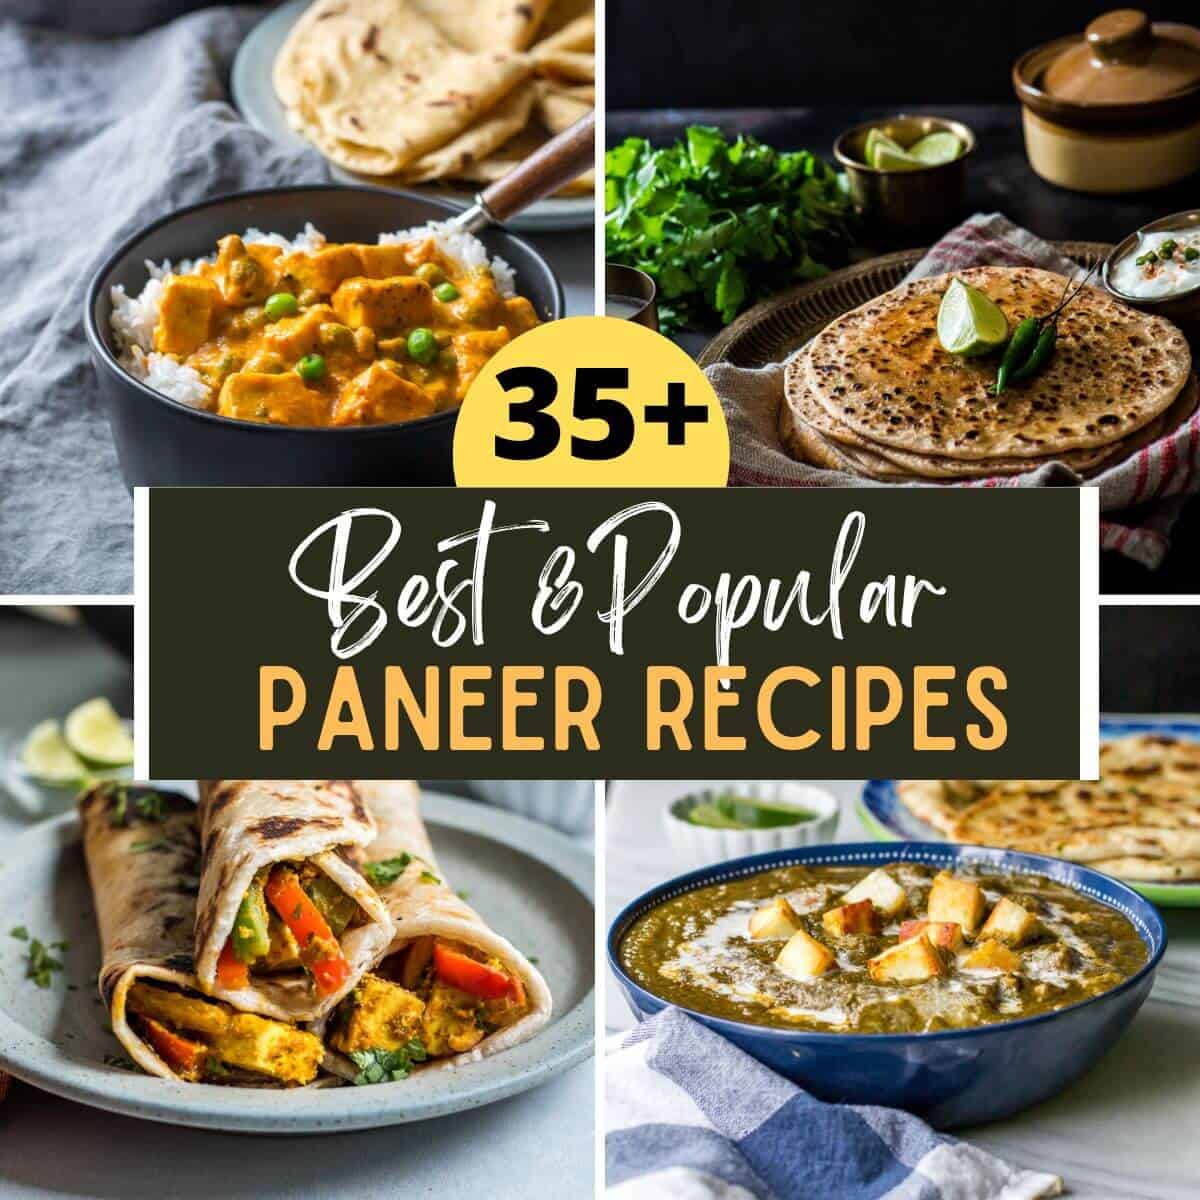 The Best Paneer Recipes (30+ dishes)